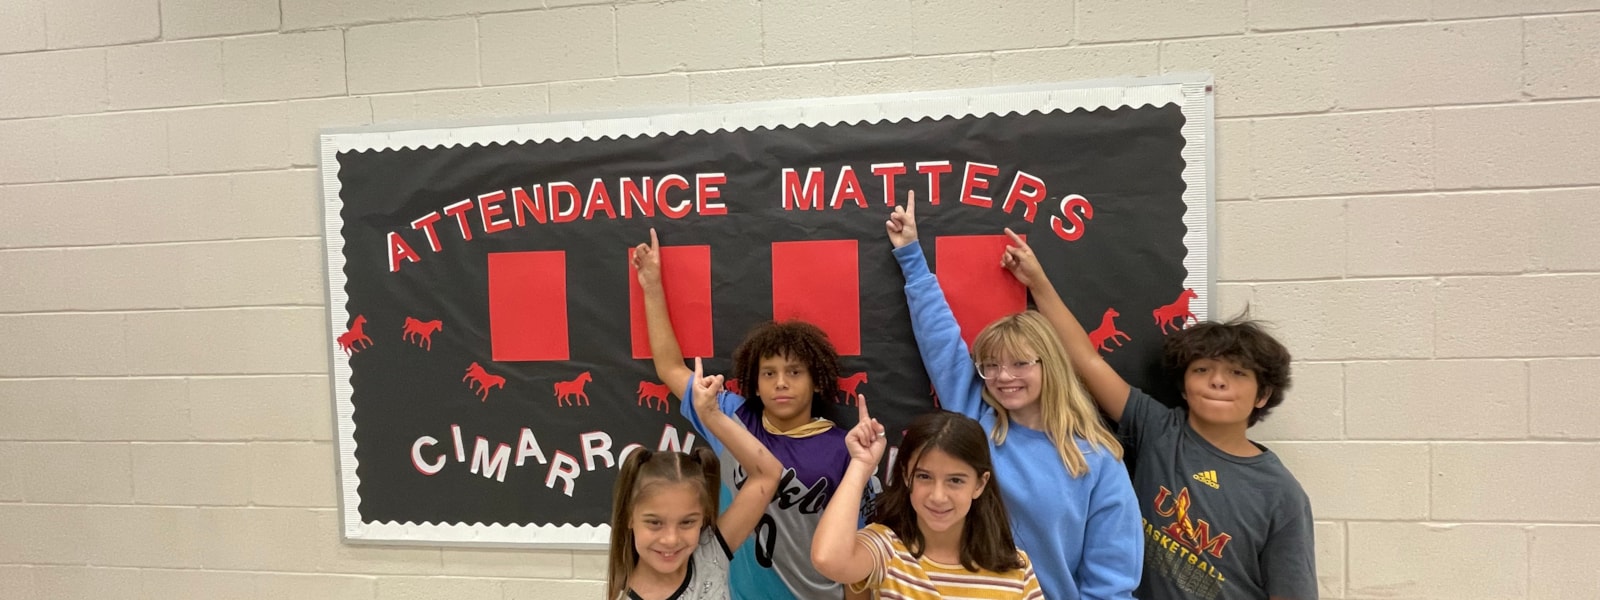 Students pointing at "Attendance Matters" board